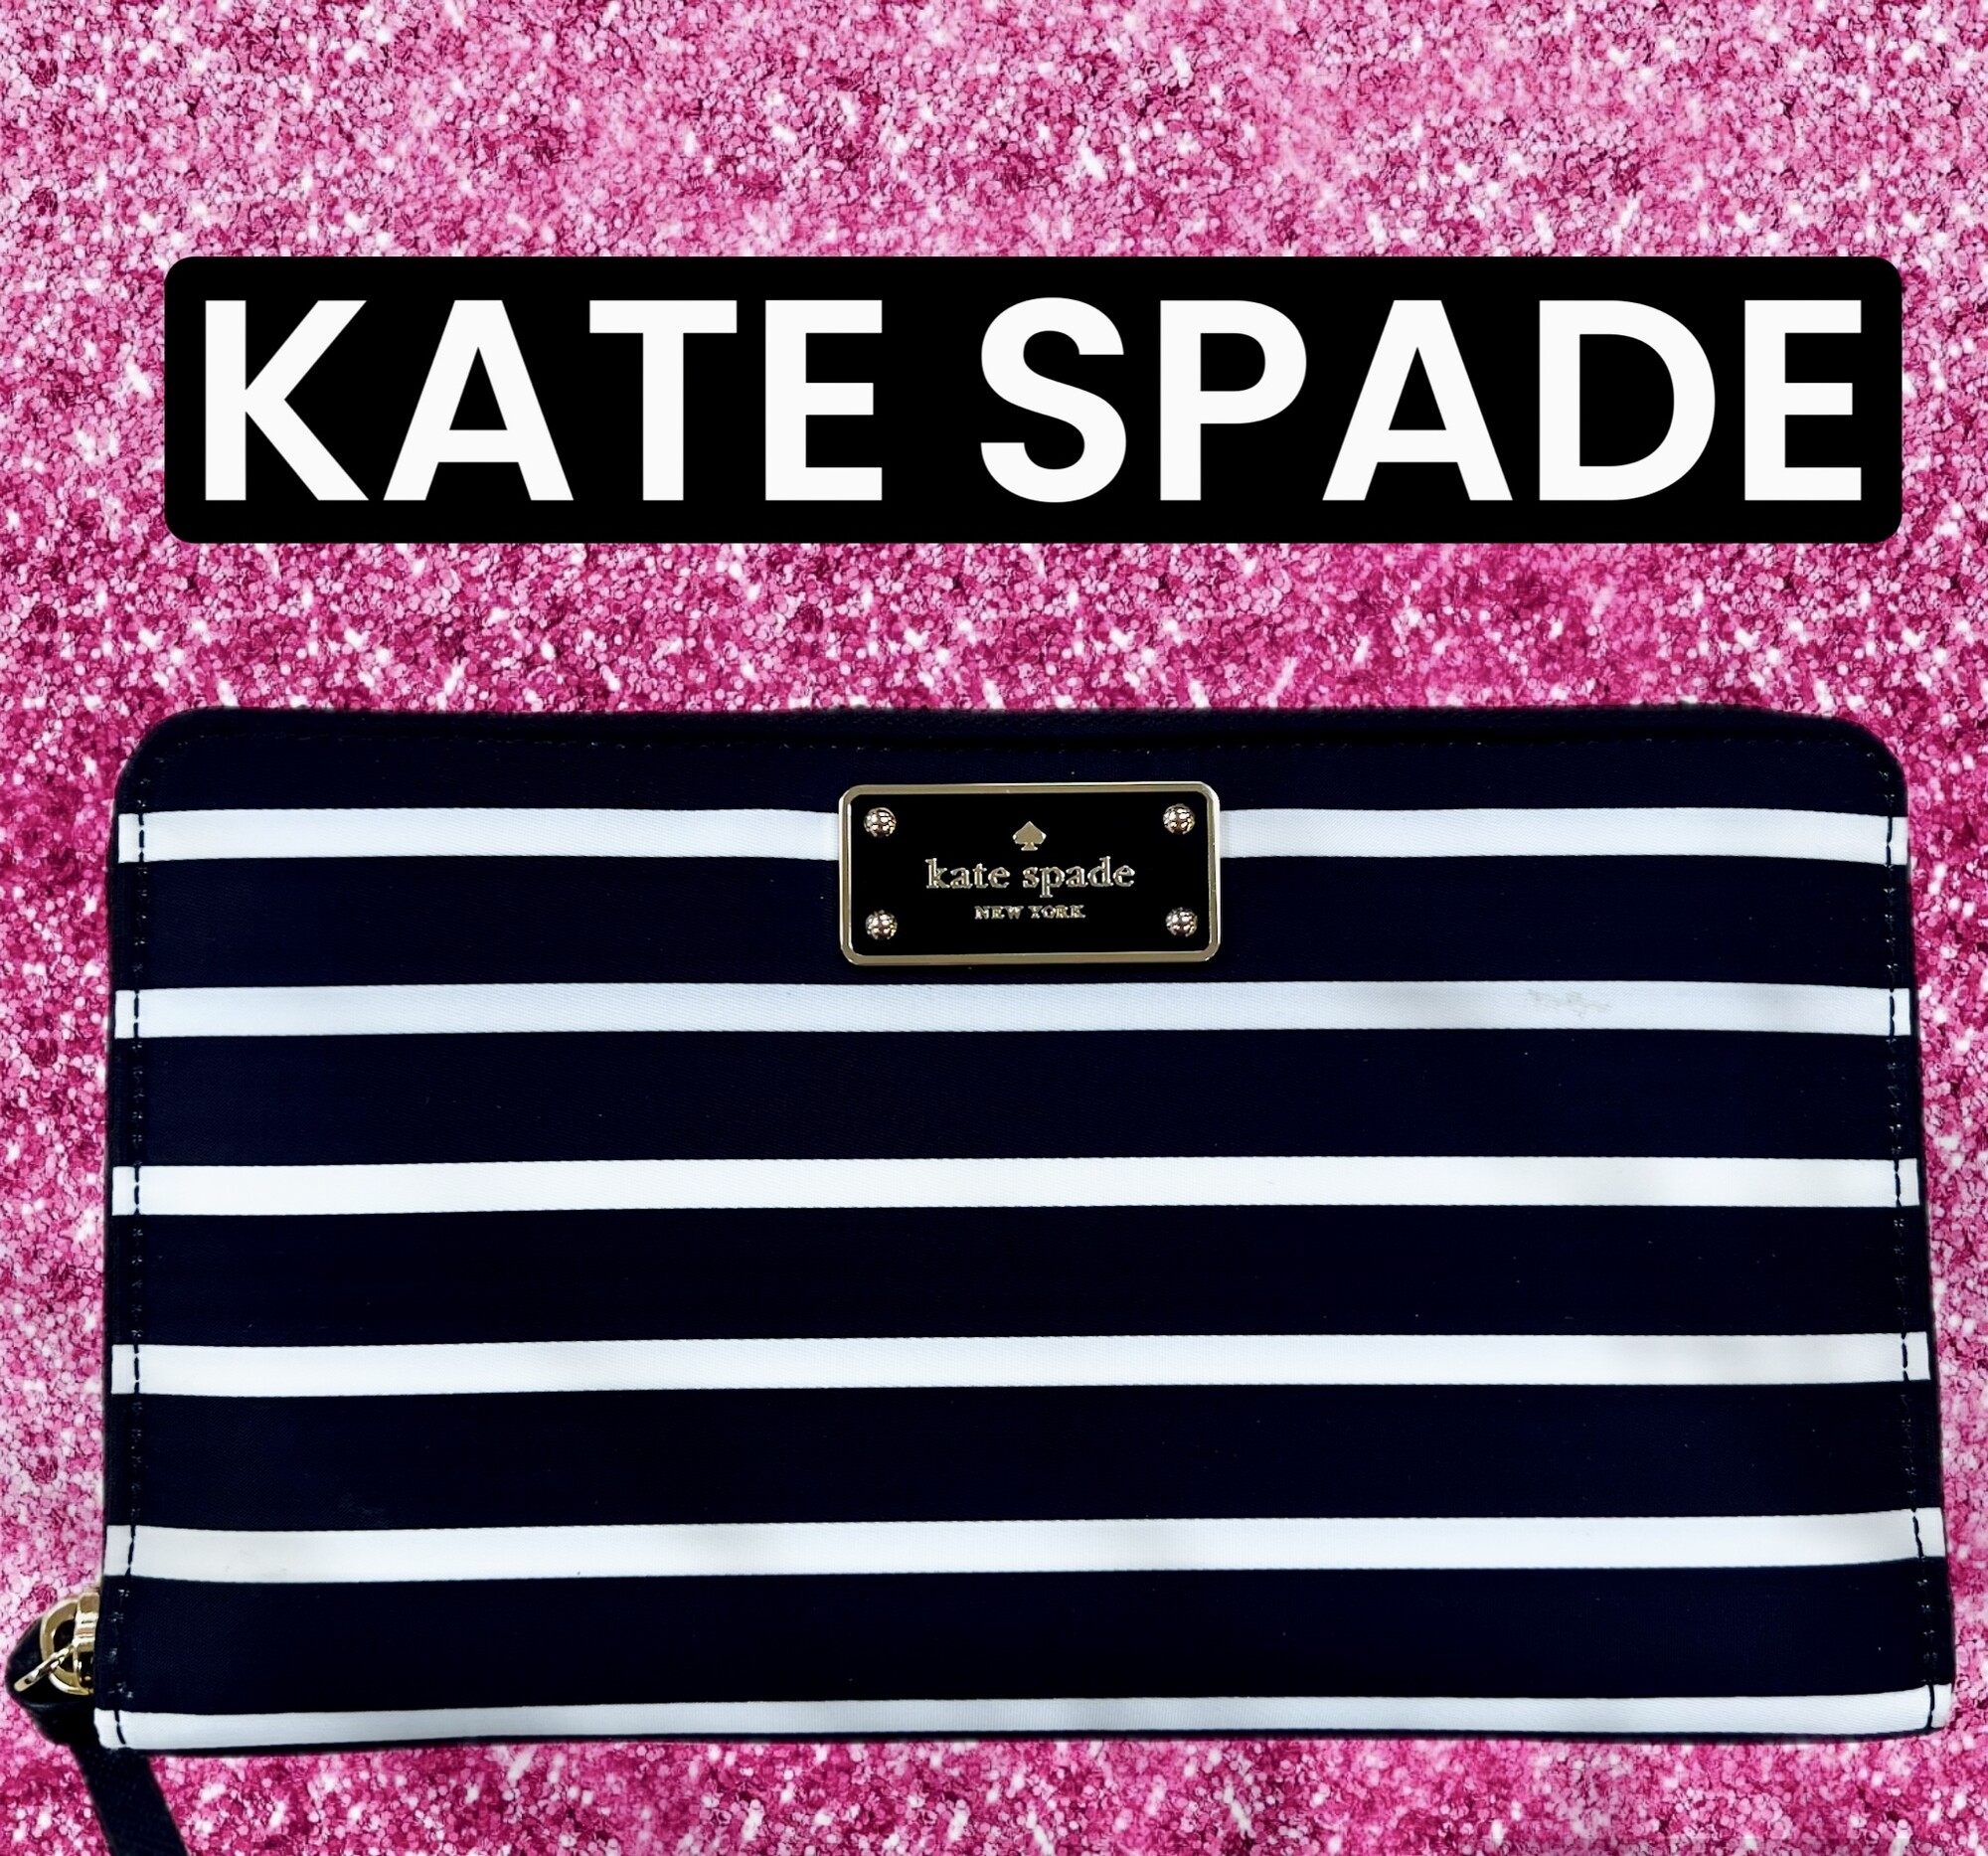 Kate Spade New York | Black & White Wilson Road French Stripe Kaden Wallet
Stylishly stash your cards, cash and coins with the help of this luxe leather wallet made in a versatile solid shade
8.7'' W x 5.3'' H x 0.8'' D
Nylon / leather trim
Lined
Zip closure
Interior: standard wallet pockets
Exterior: one zip pocket
Original Retail Price:  179.00
New with Tags.  No marks or flaws.